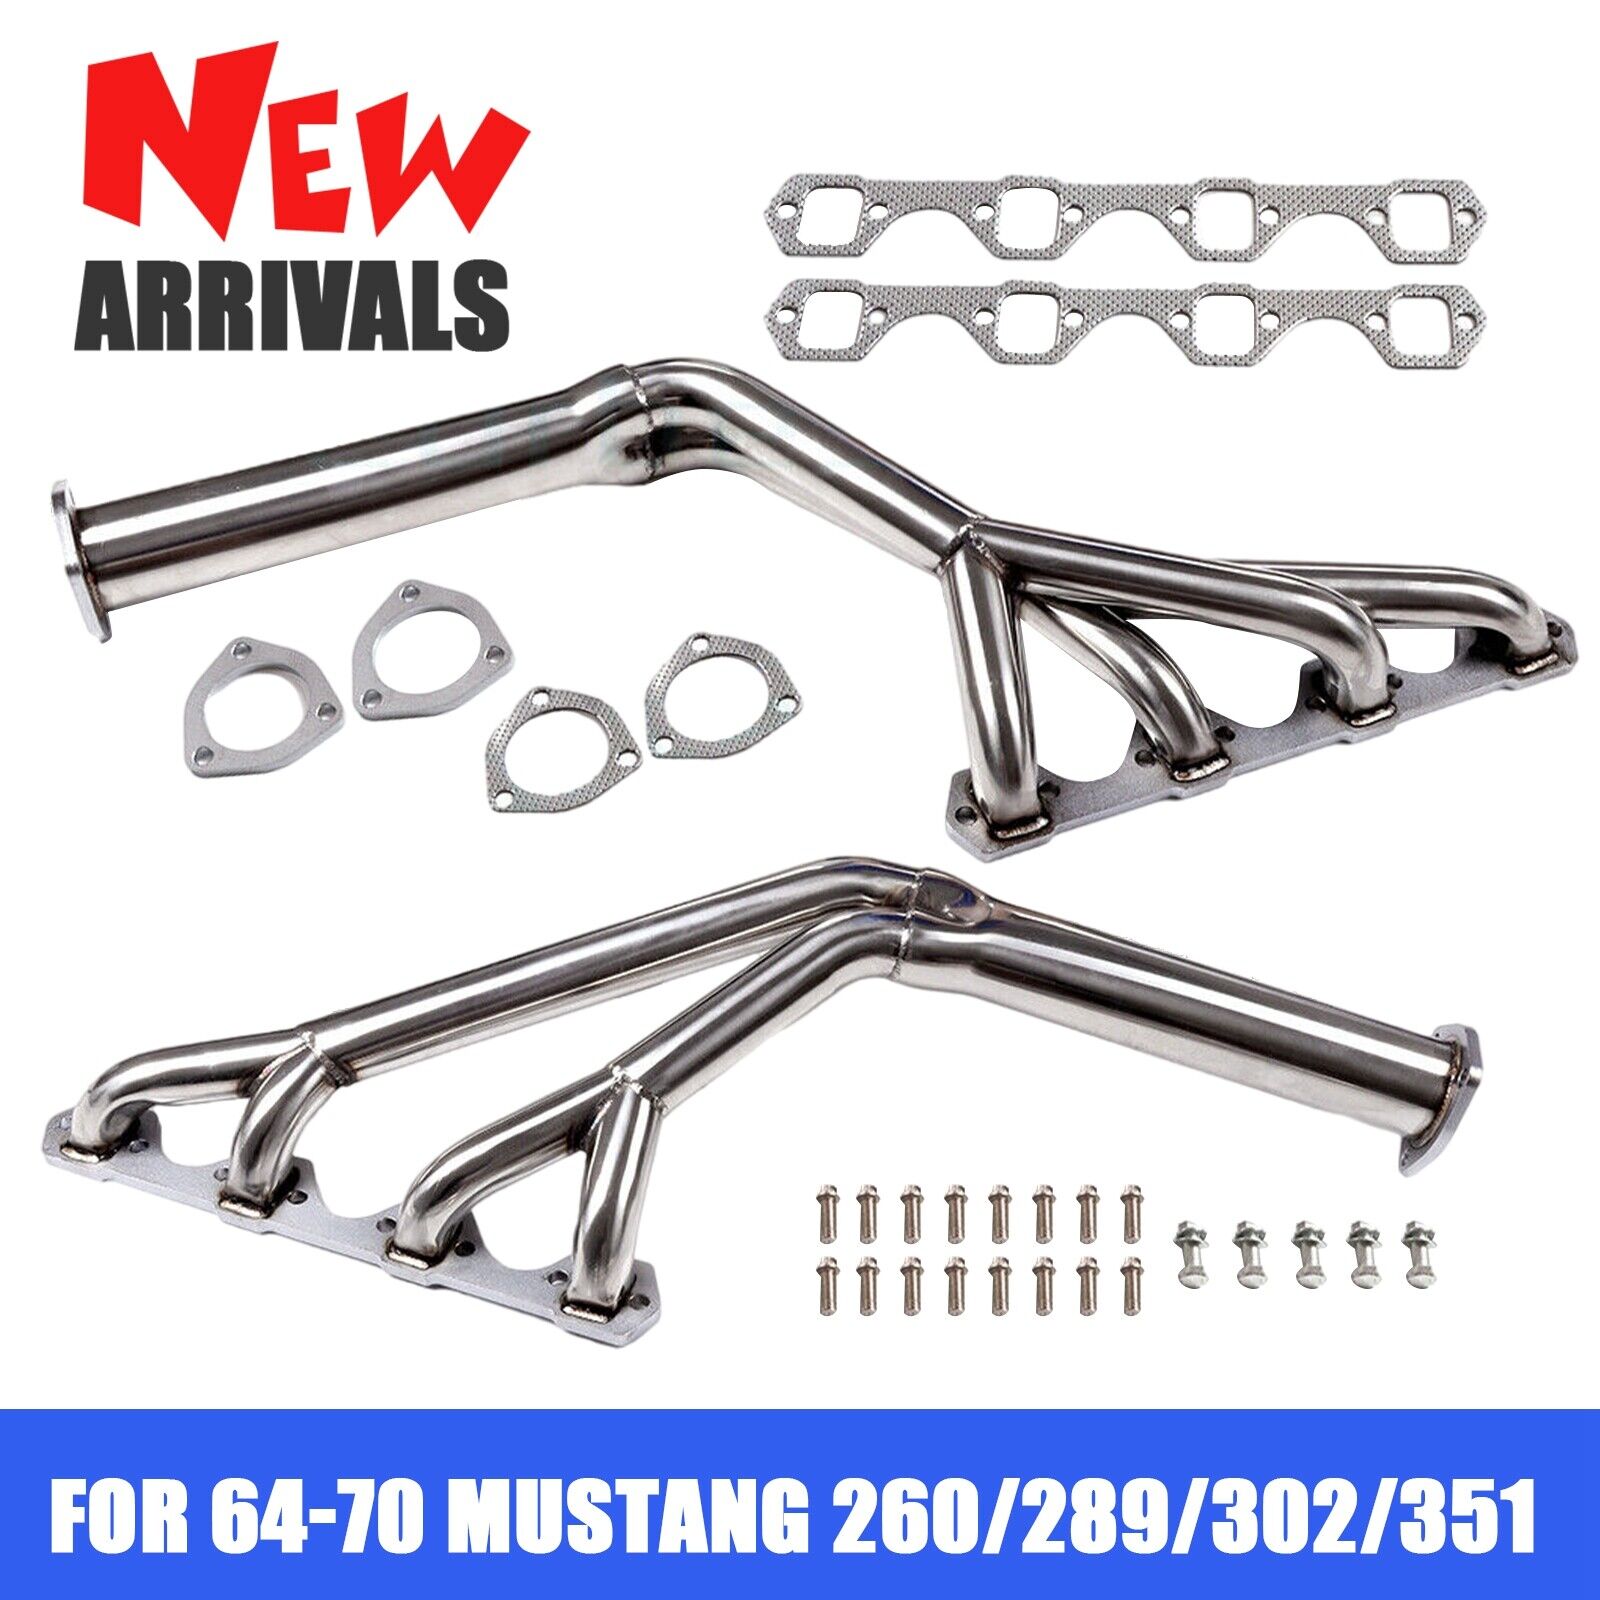 Stainless Steel Manifold Headers for Ford 1964-1970 Mustang 260/289/302/351 V8